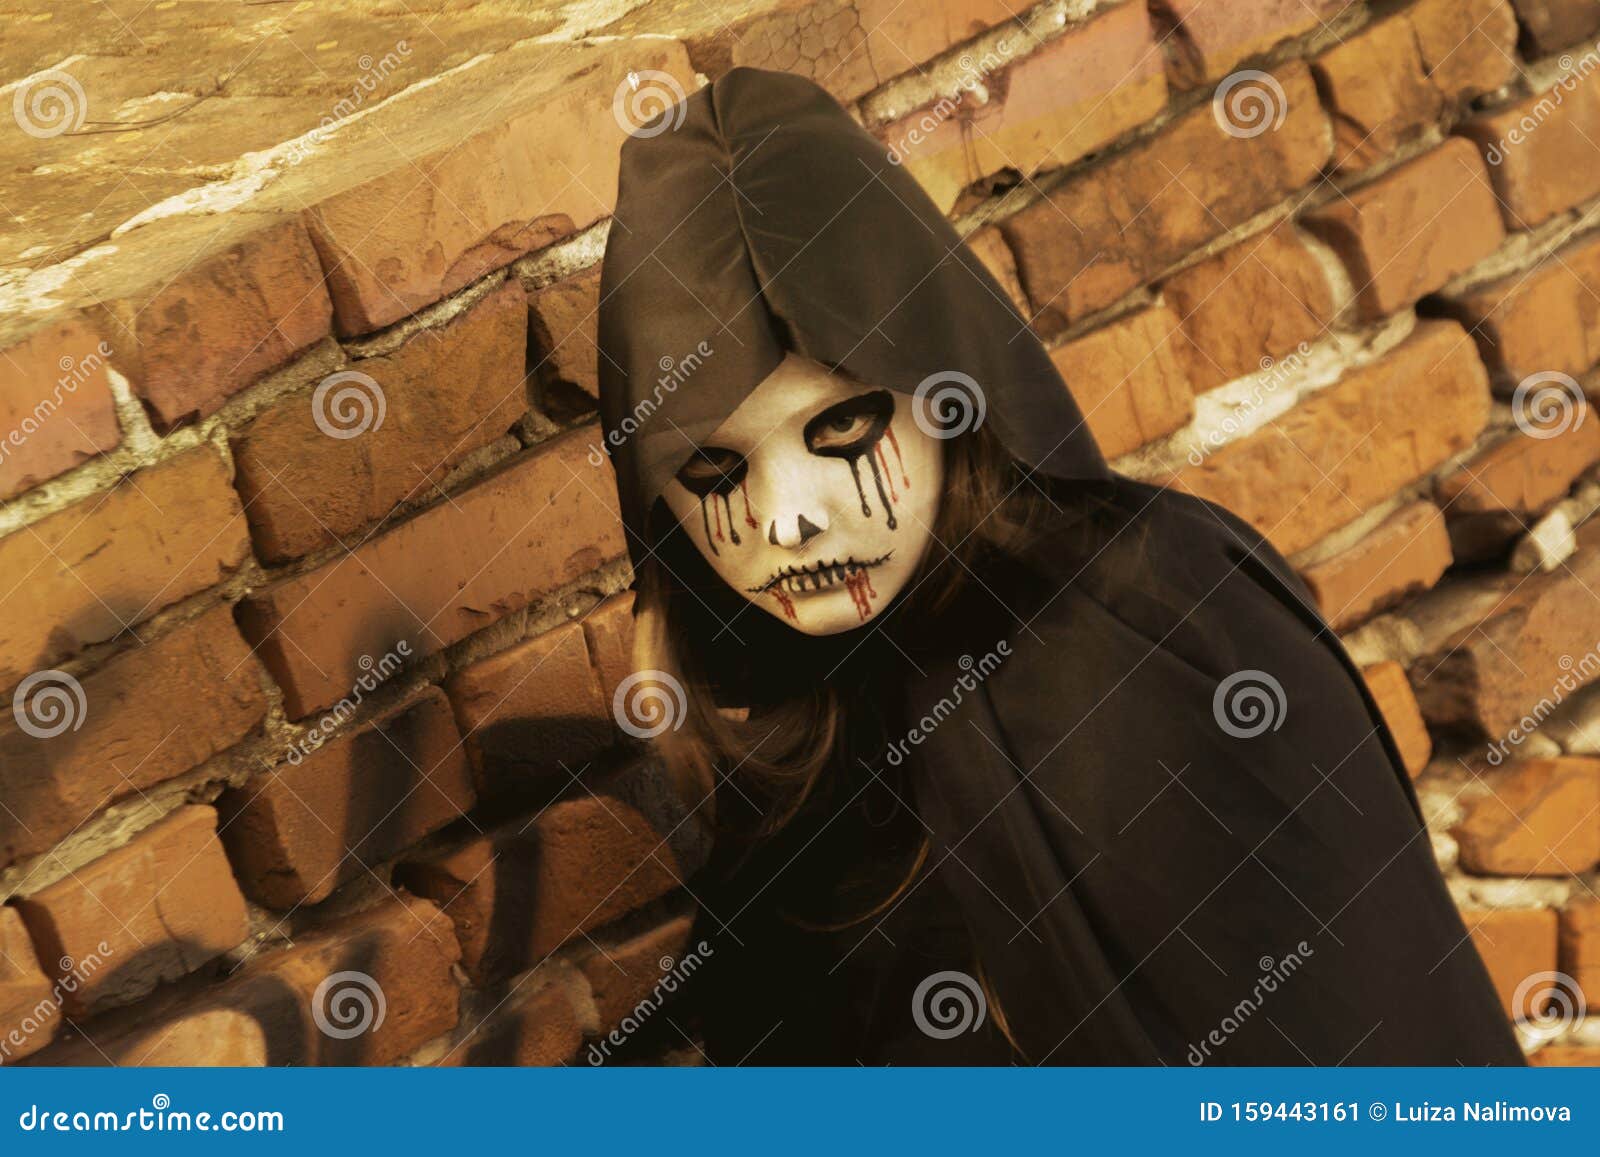 portrait of a little teenager girl in a zombie costum against a brick wall. halloween and day of the dead concept. zombie looks at